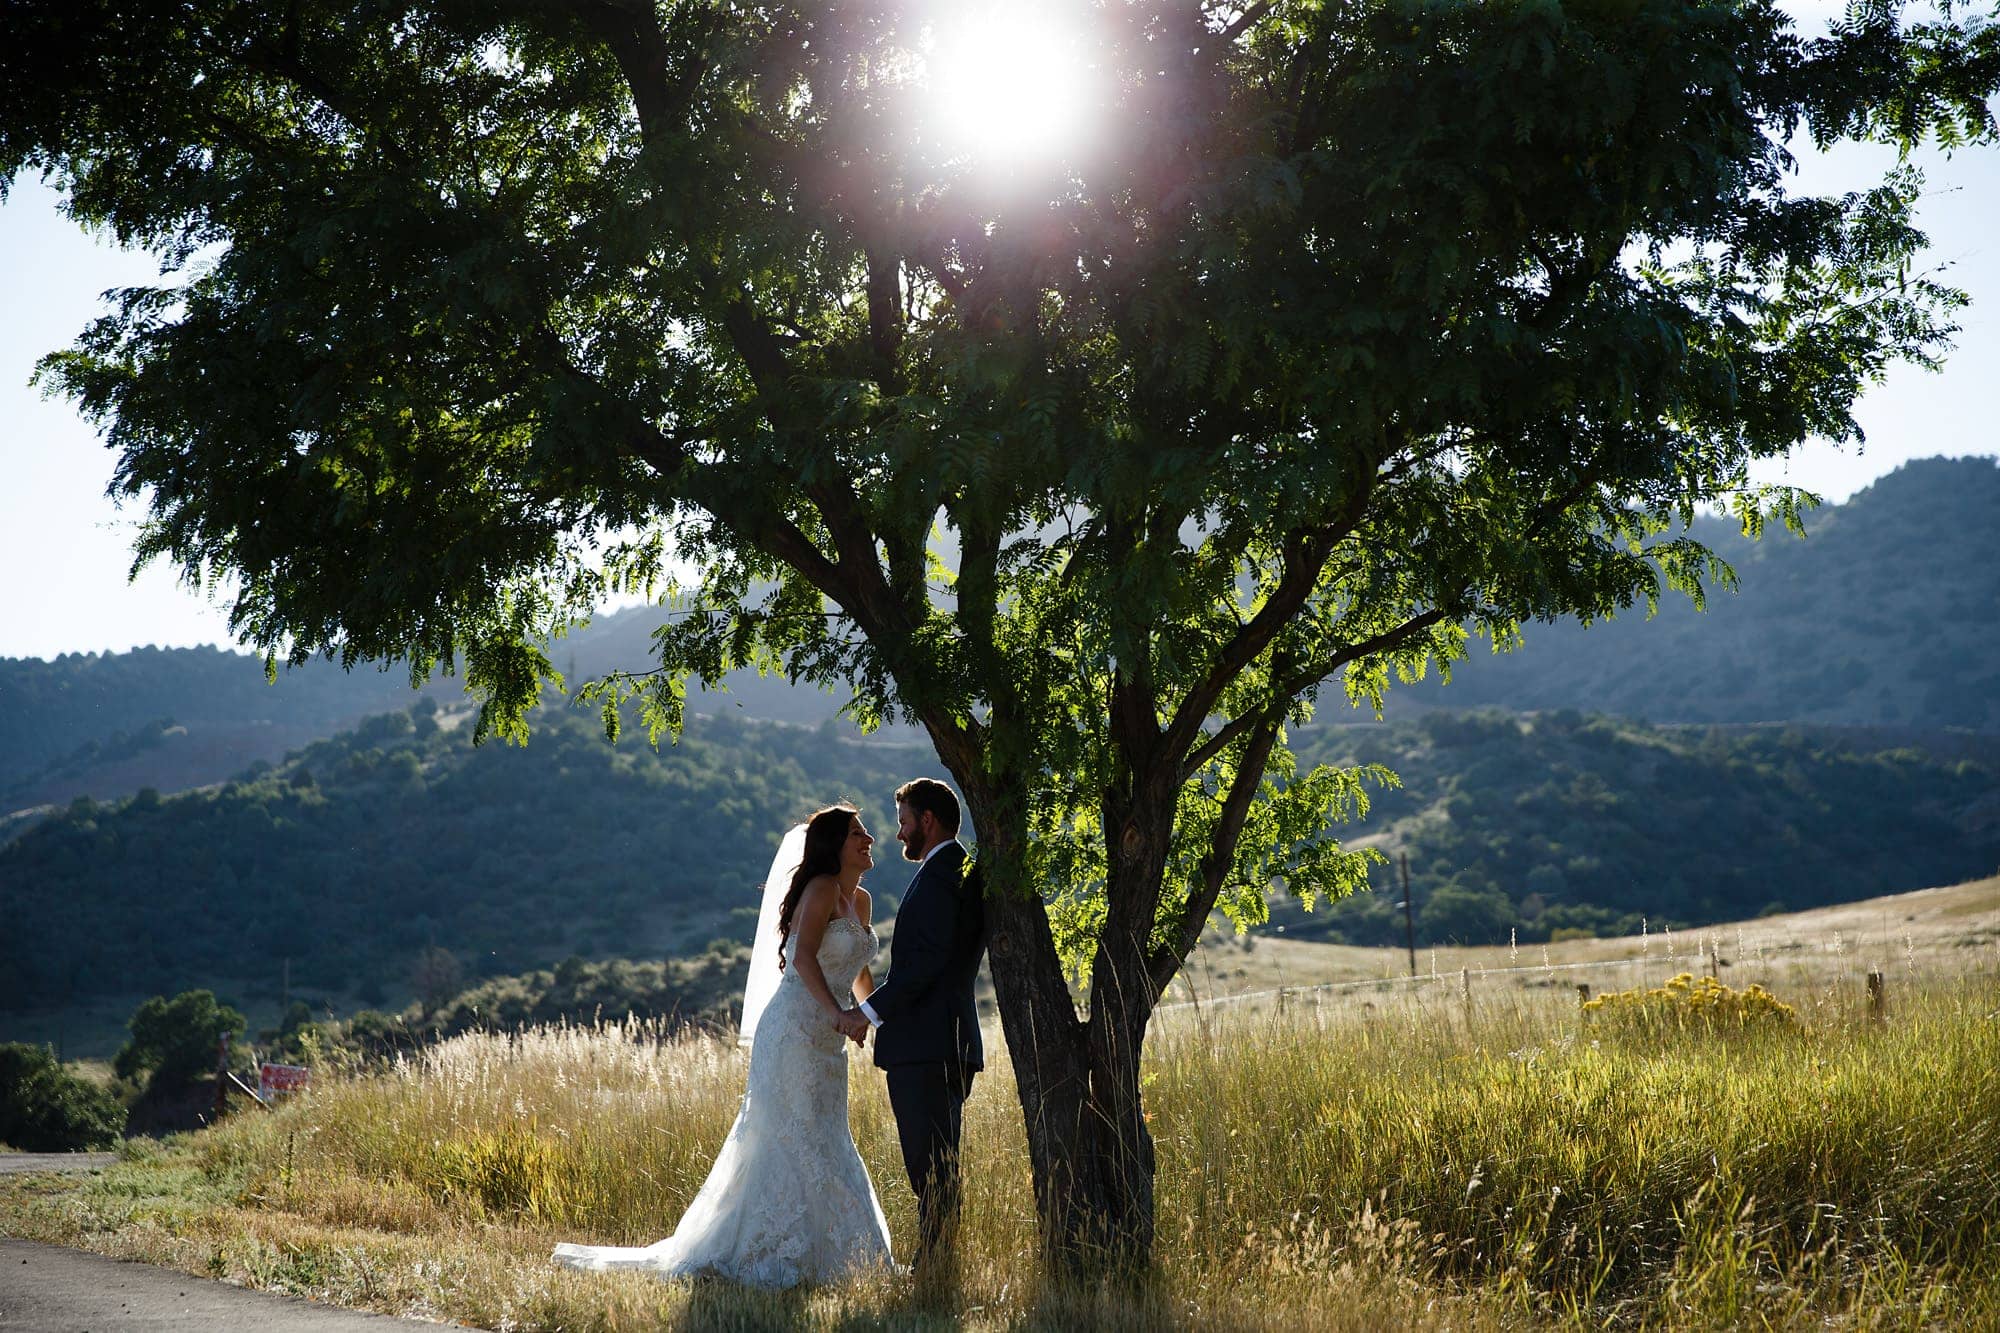 Blake and Gina share a moment together after their wedding under a tree in Morrison, Colorado